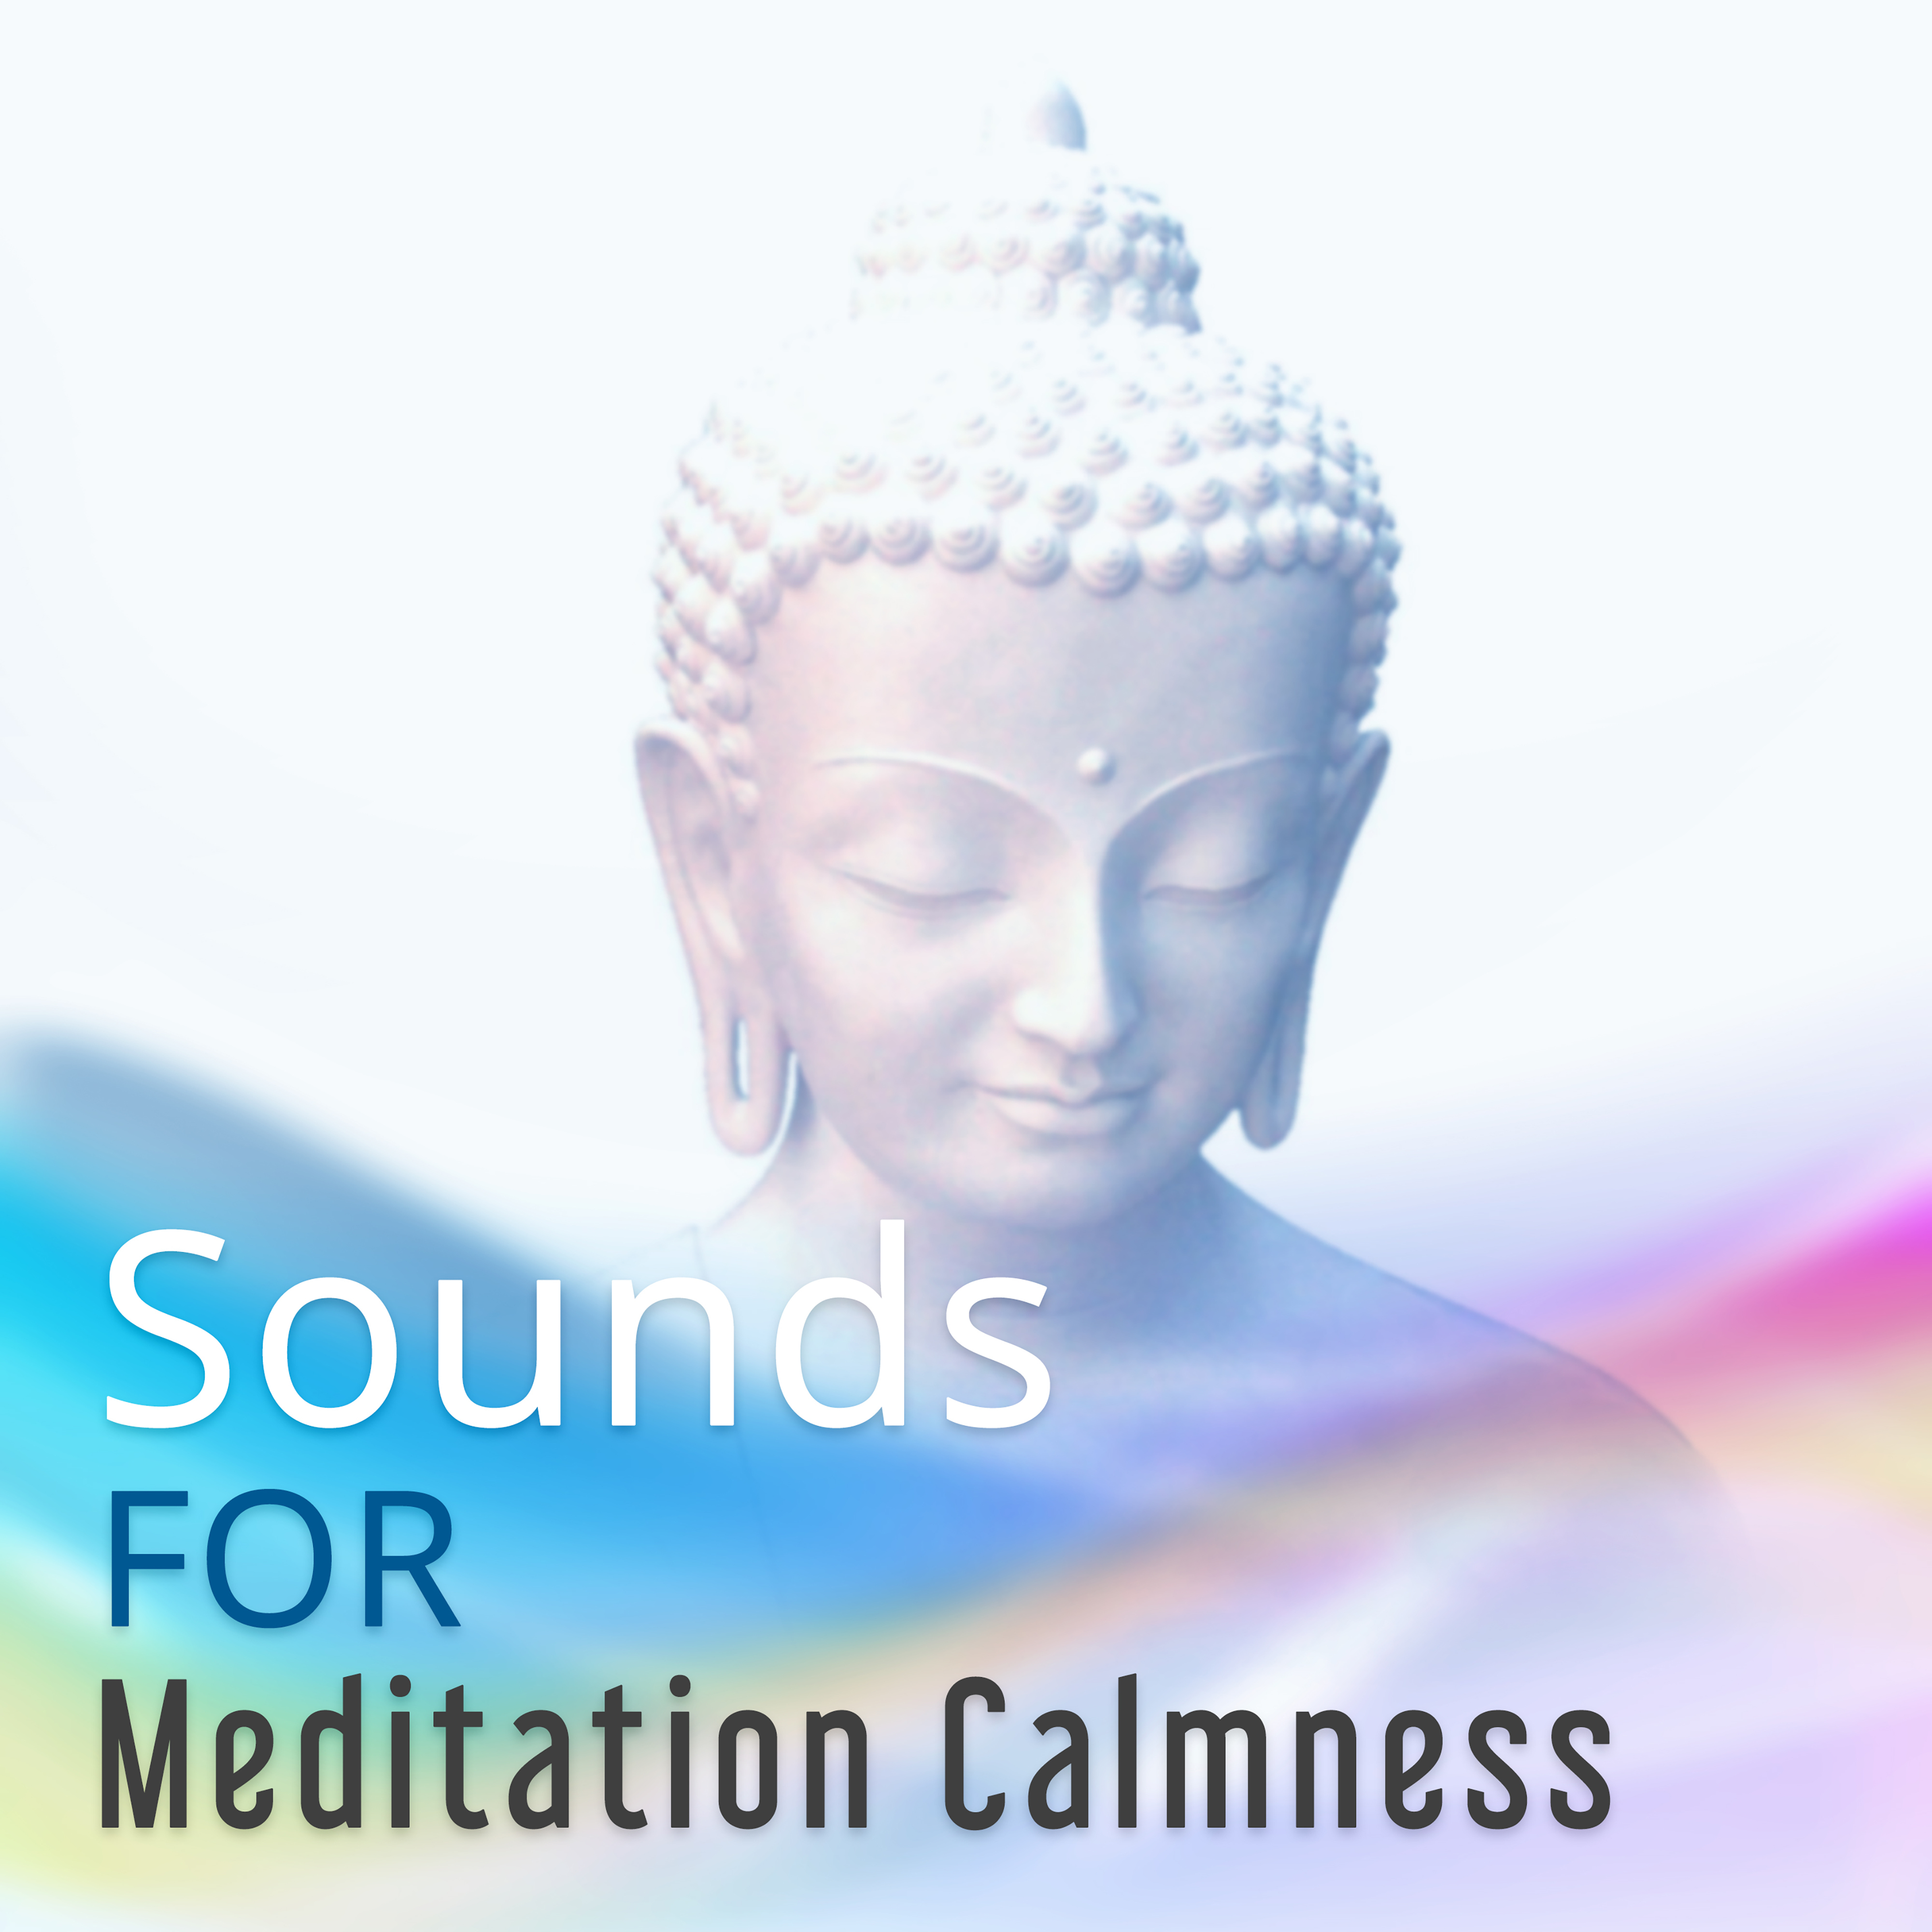 Sounds for Meditation Calmness – Relaxing Sounds, Calm Your Mind, Inner Journey, Harmony Music, Soft Relaxation